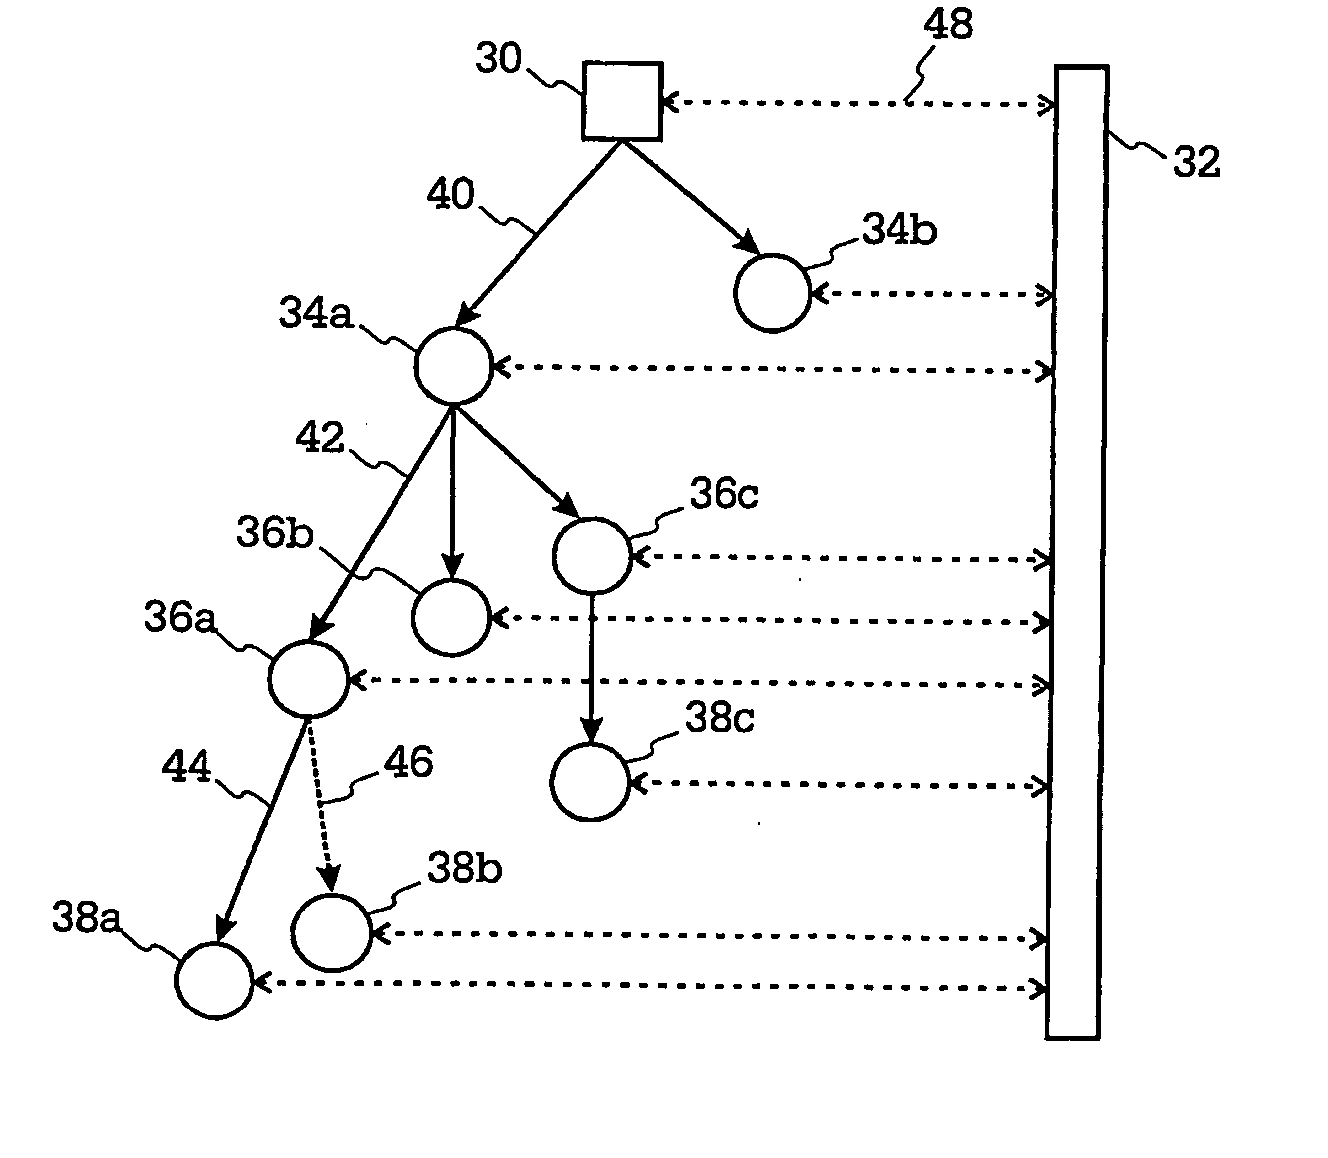 Method for transmitting a data stream from a producer to a plurality of viewers